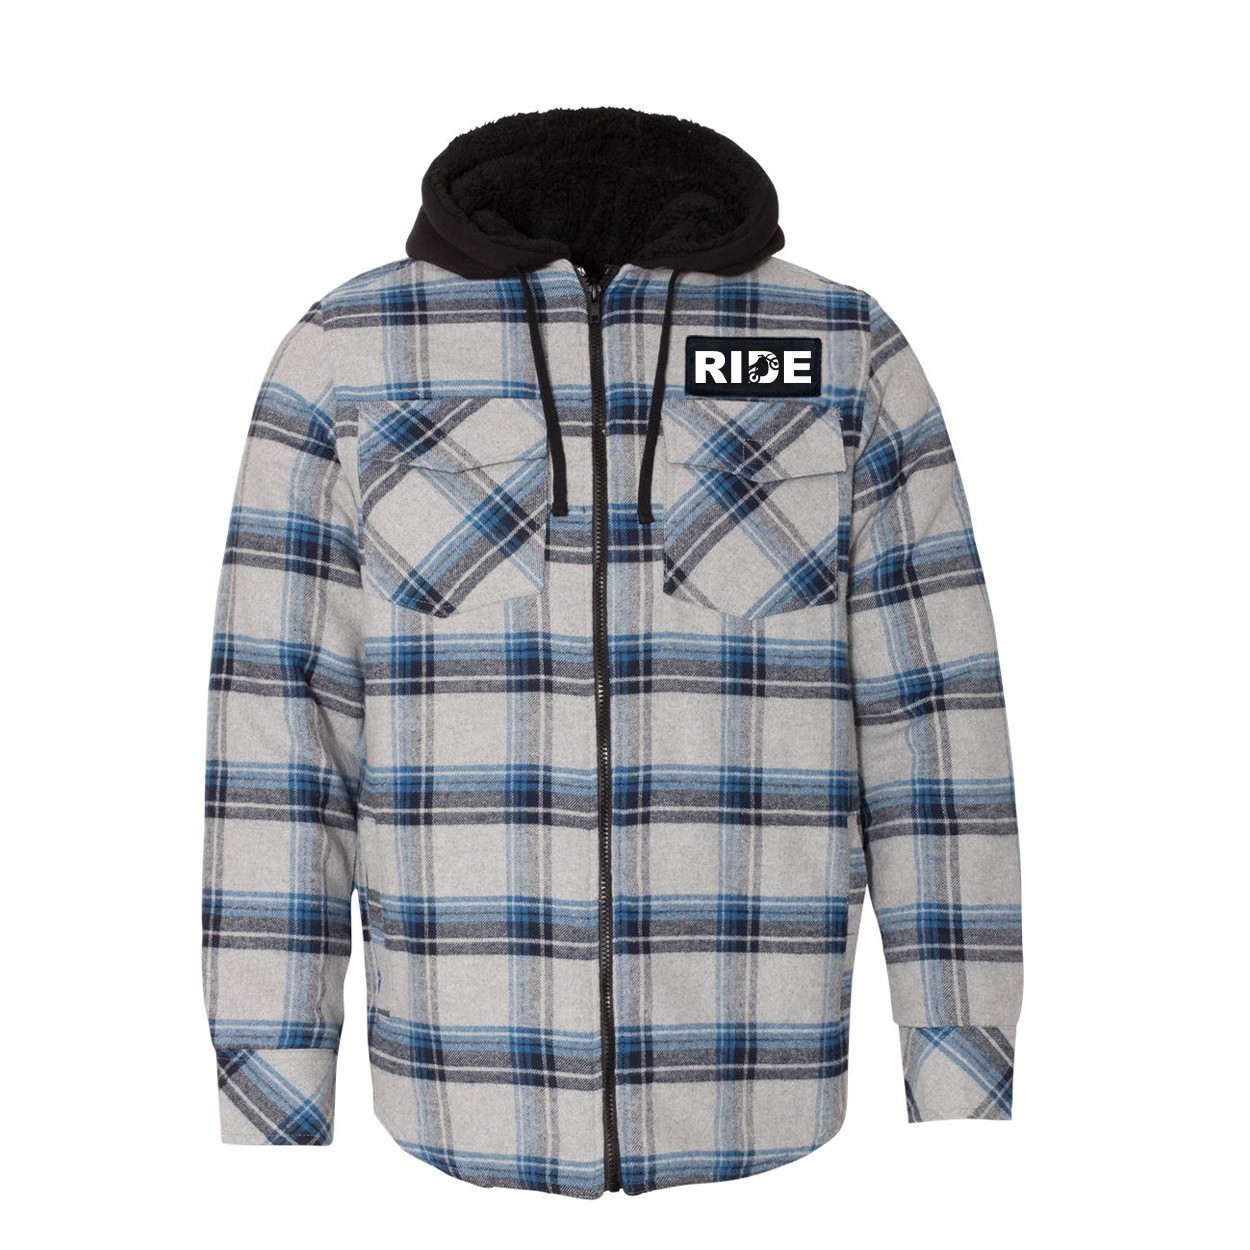 Ride Moto Logo Classic Unisex Full Zip Woven Patch Hooded Flannel Jacket Gray/ Blue (White Logo)